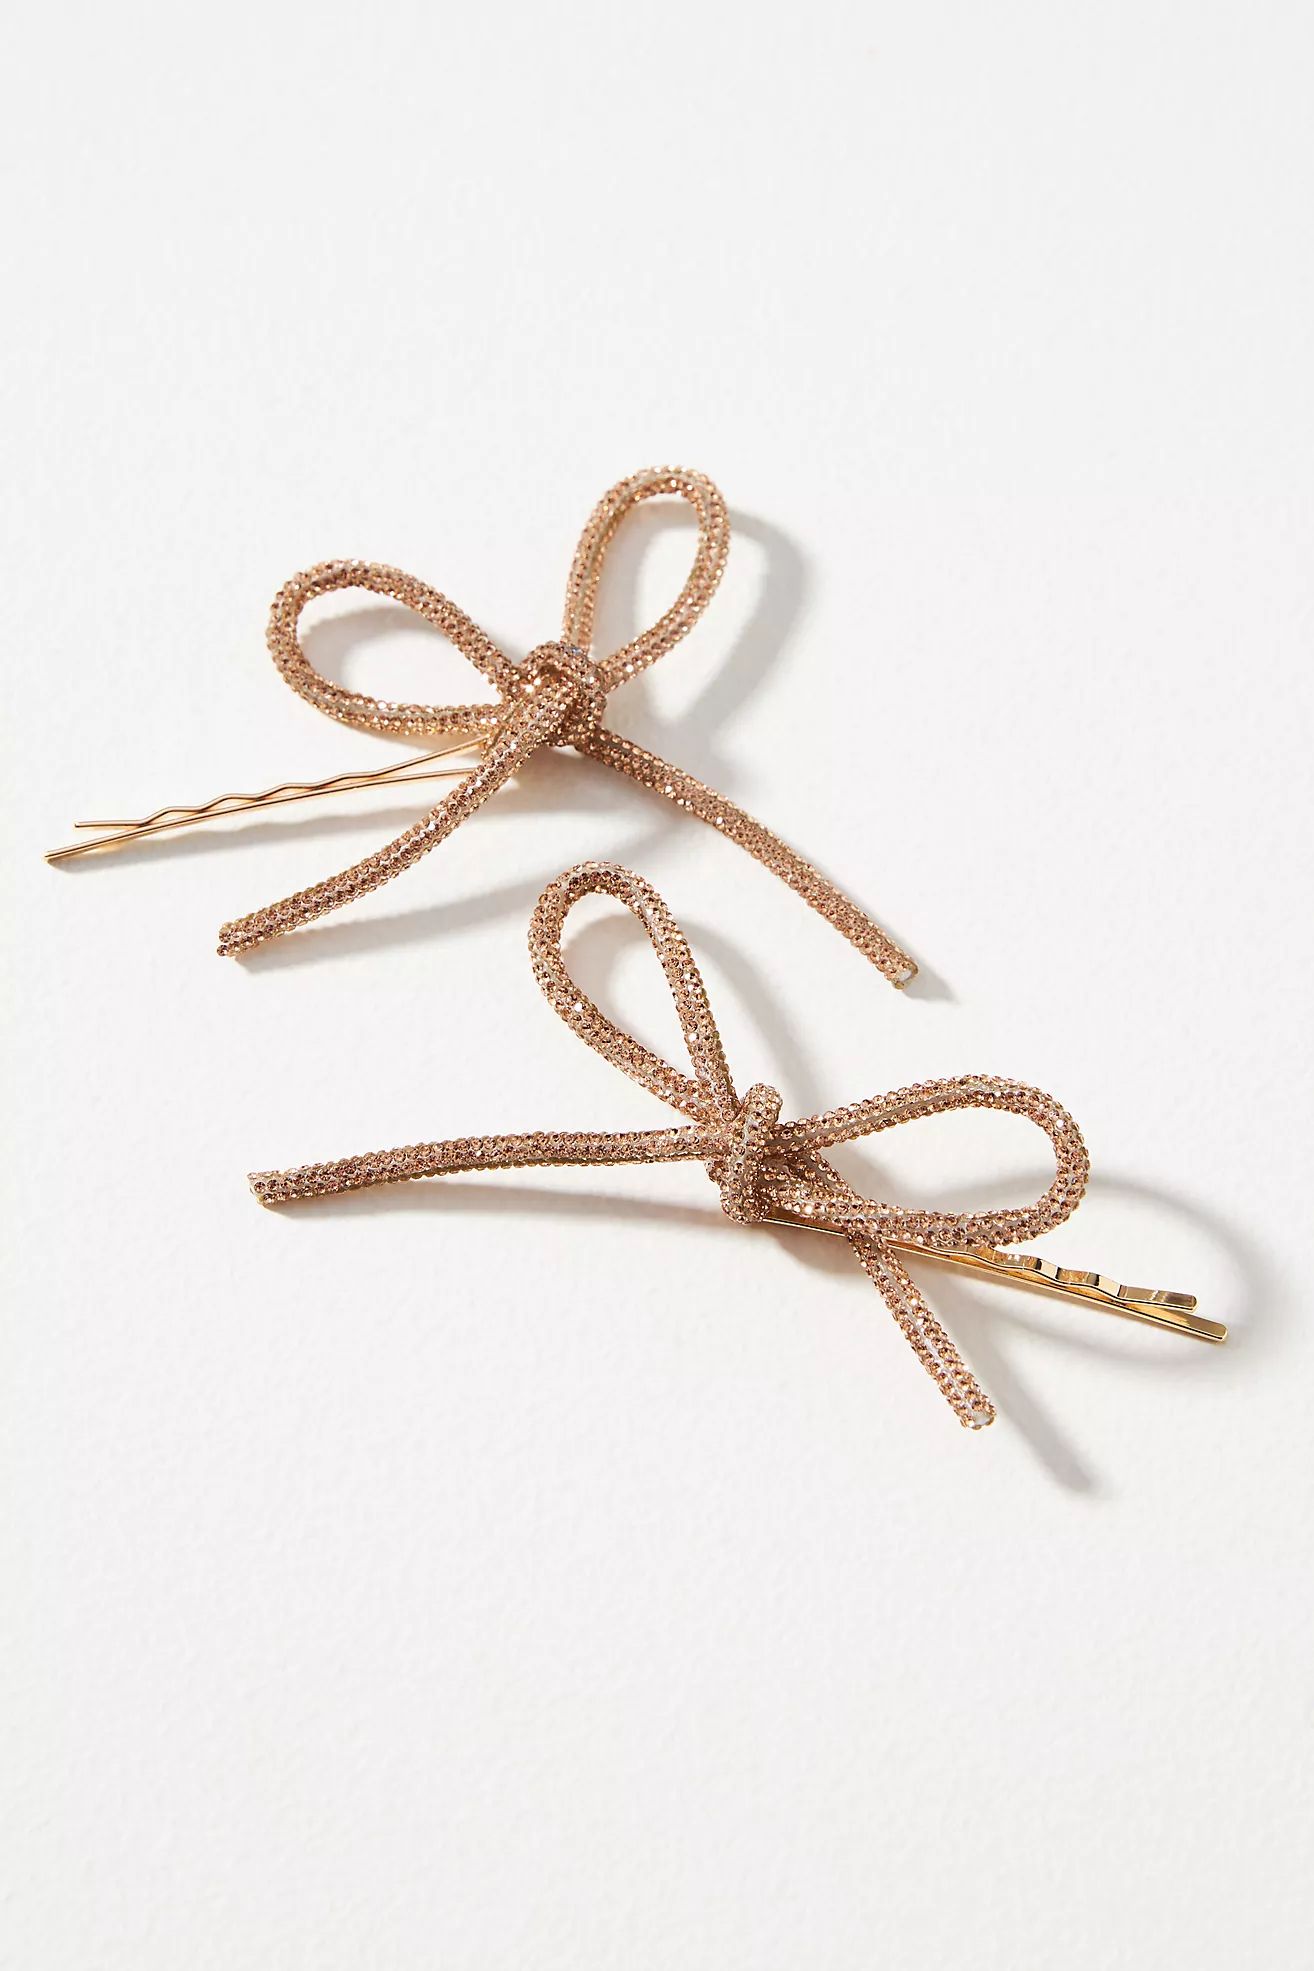 Room Shop Sparkle Bow Bobby Pins, Set of 2 | Anthropologie (US)